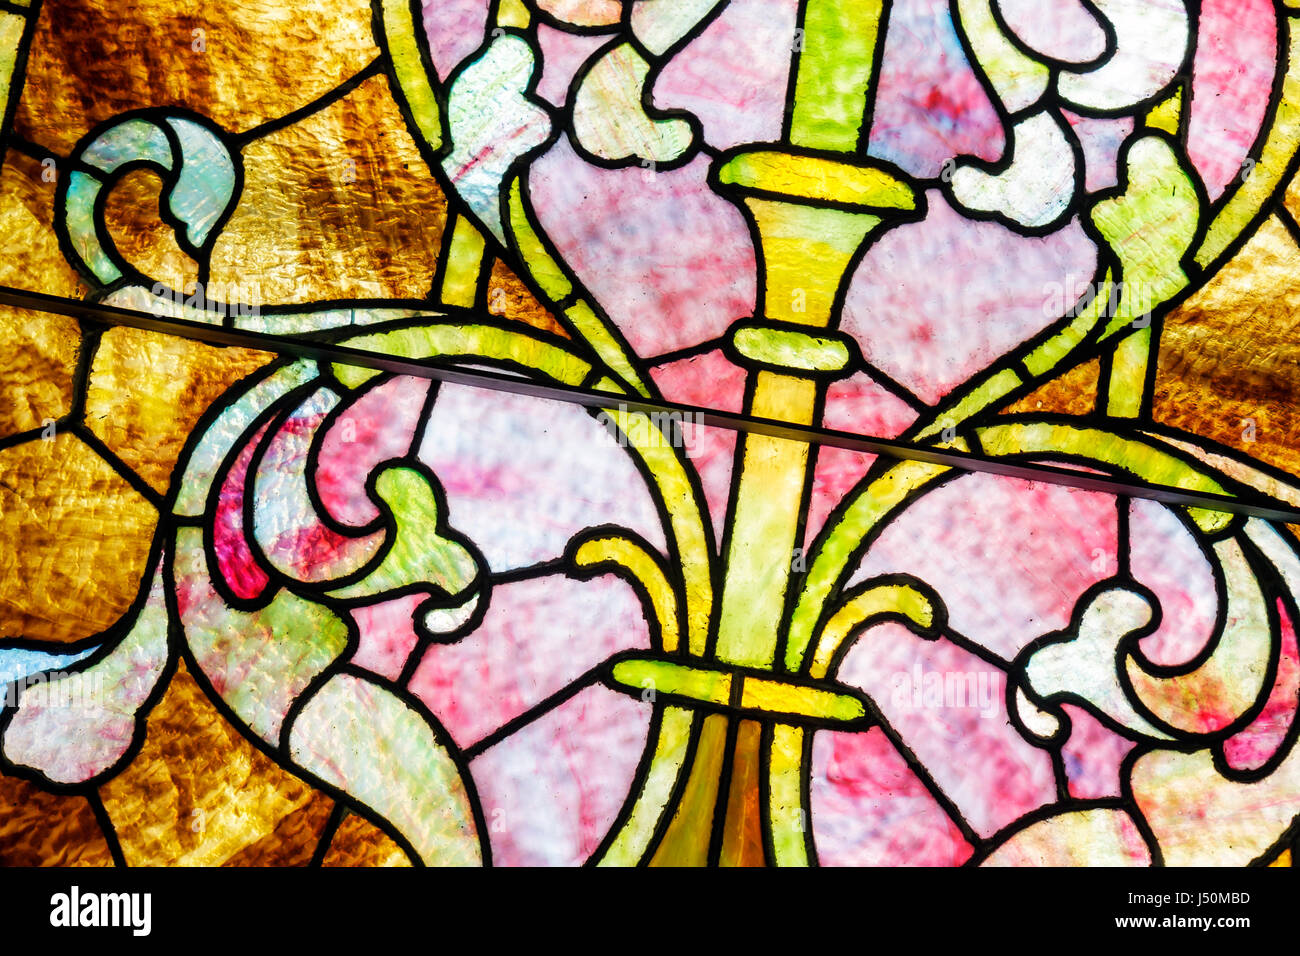 Alabama Greenville,First Methodist Church,stained glass window,detail,close up,close up,details,religion,art,AL080521009 Stock Photo